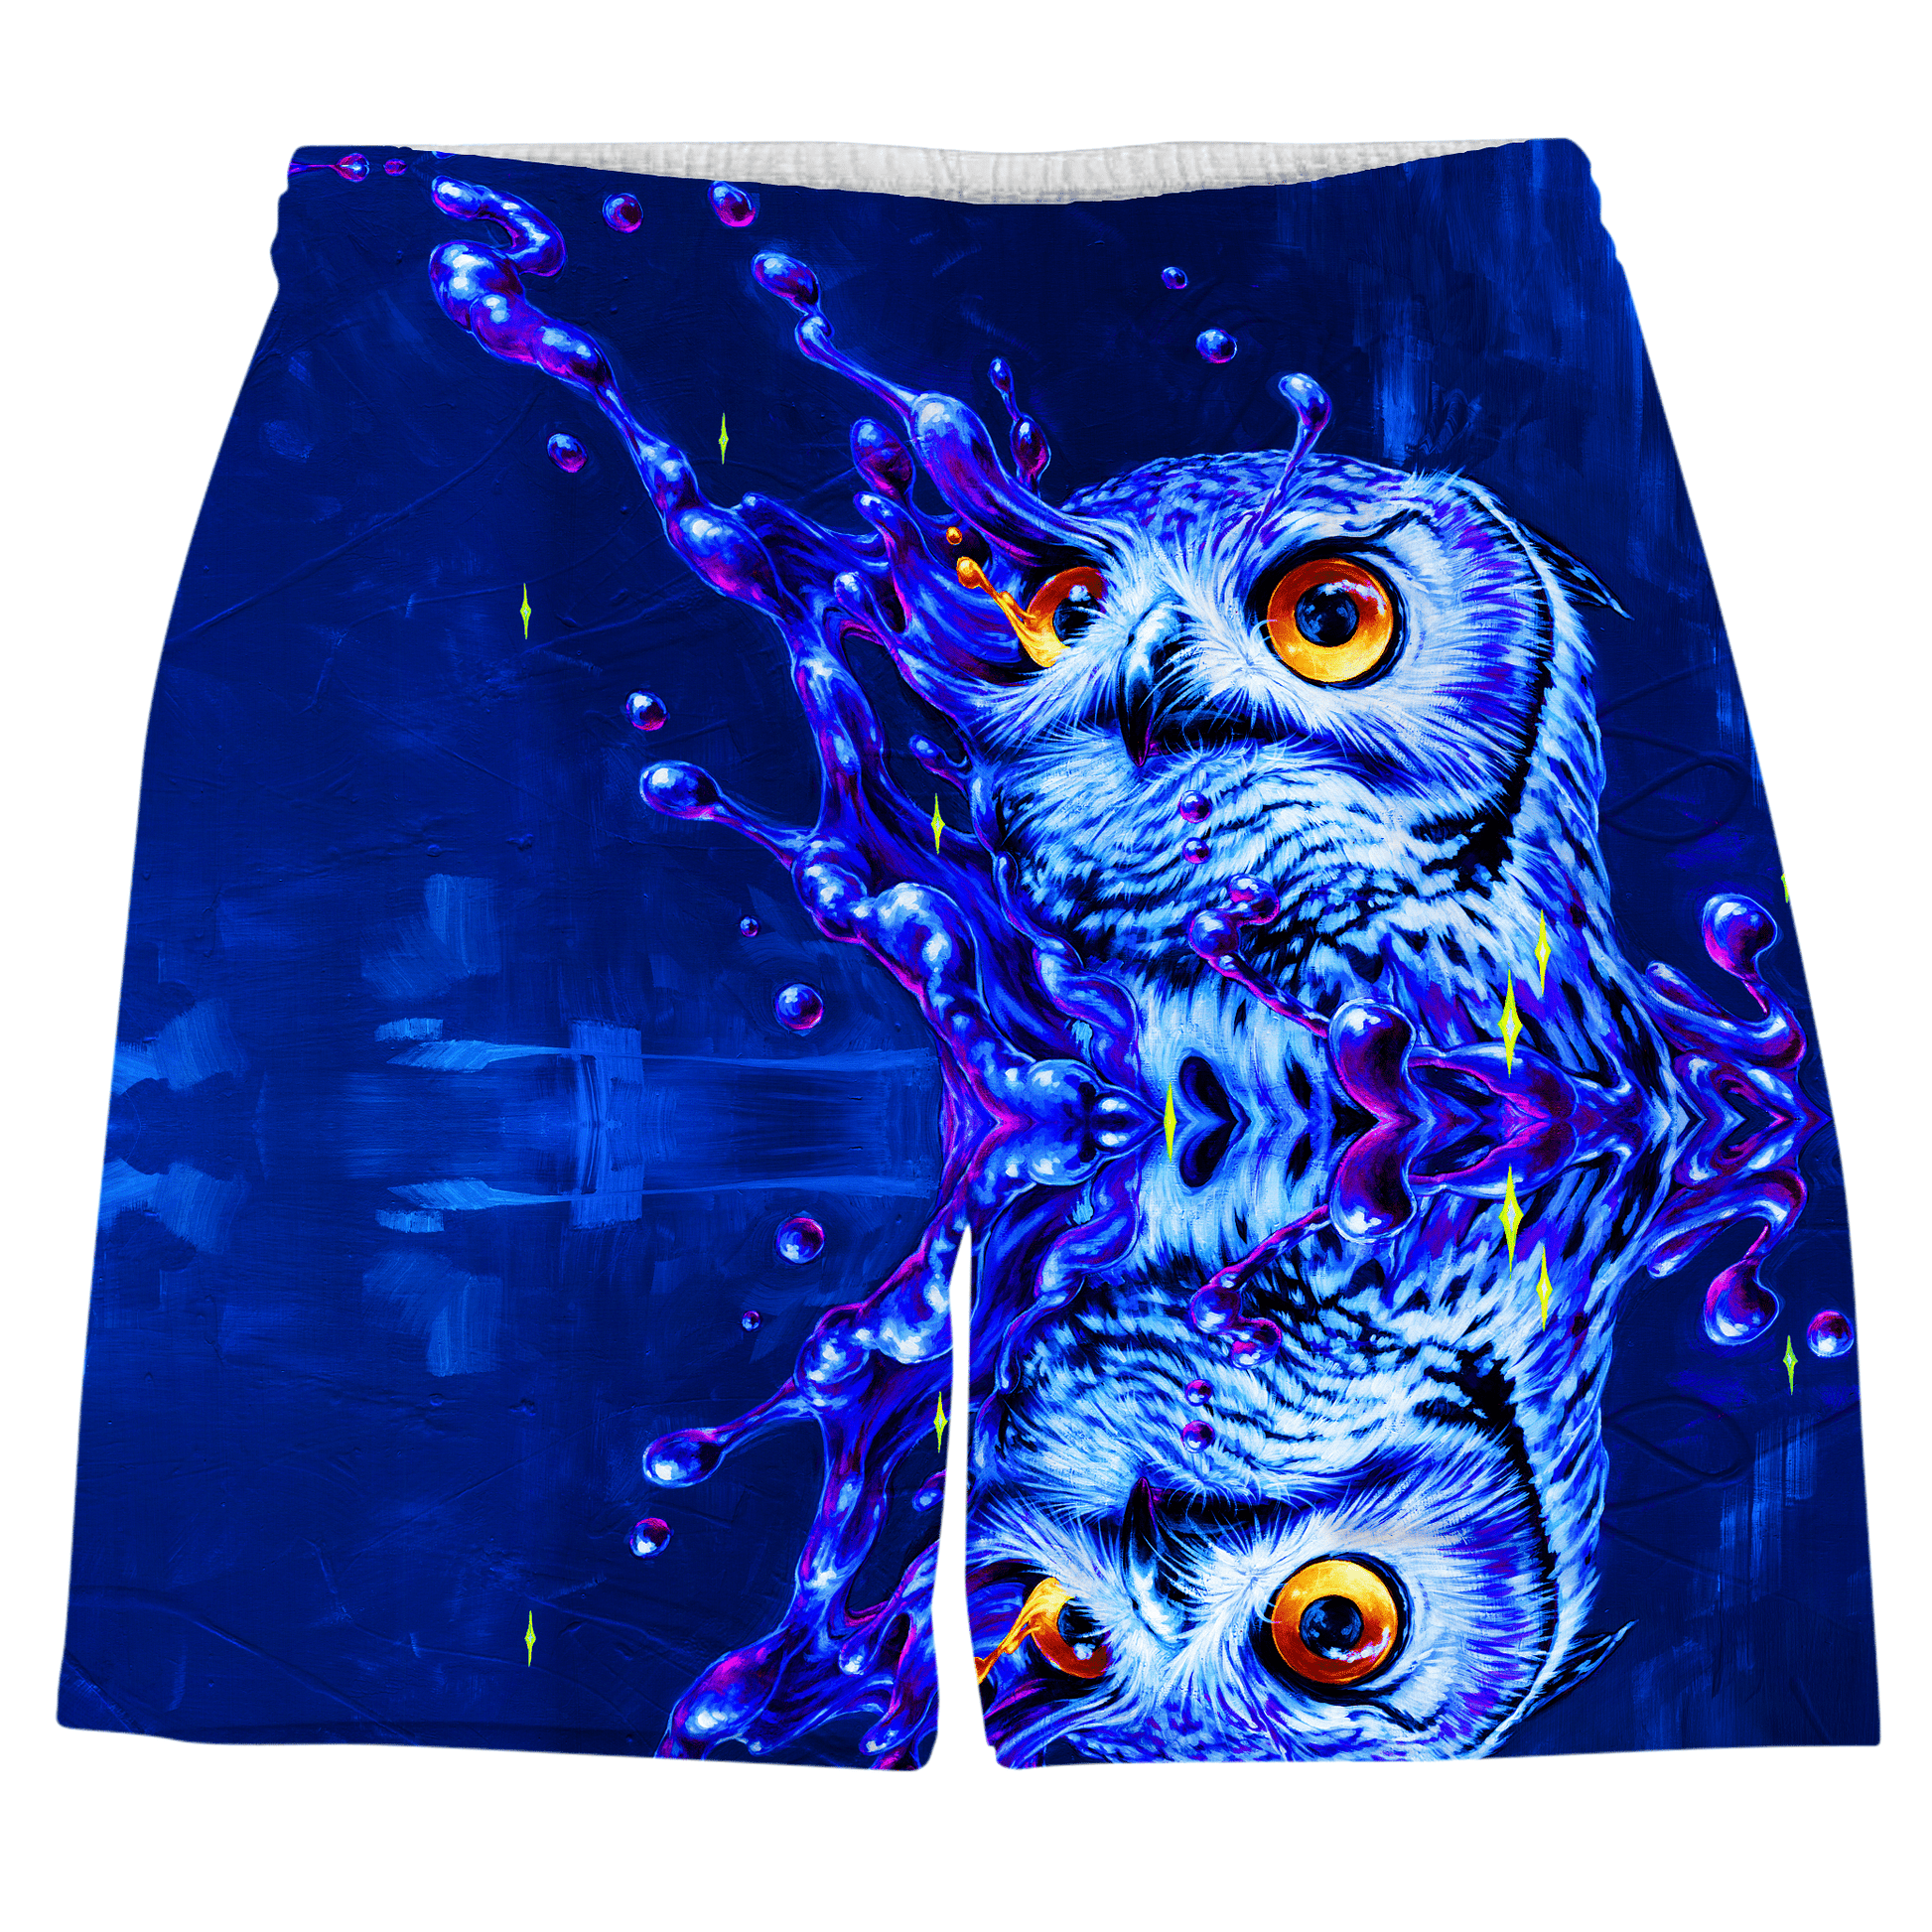 Lucid Owl Tank and Shorts Combo, Noctum X Truth, | iEDM